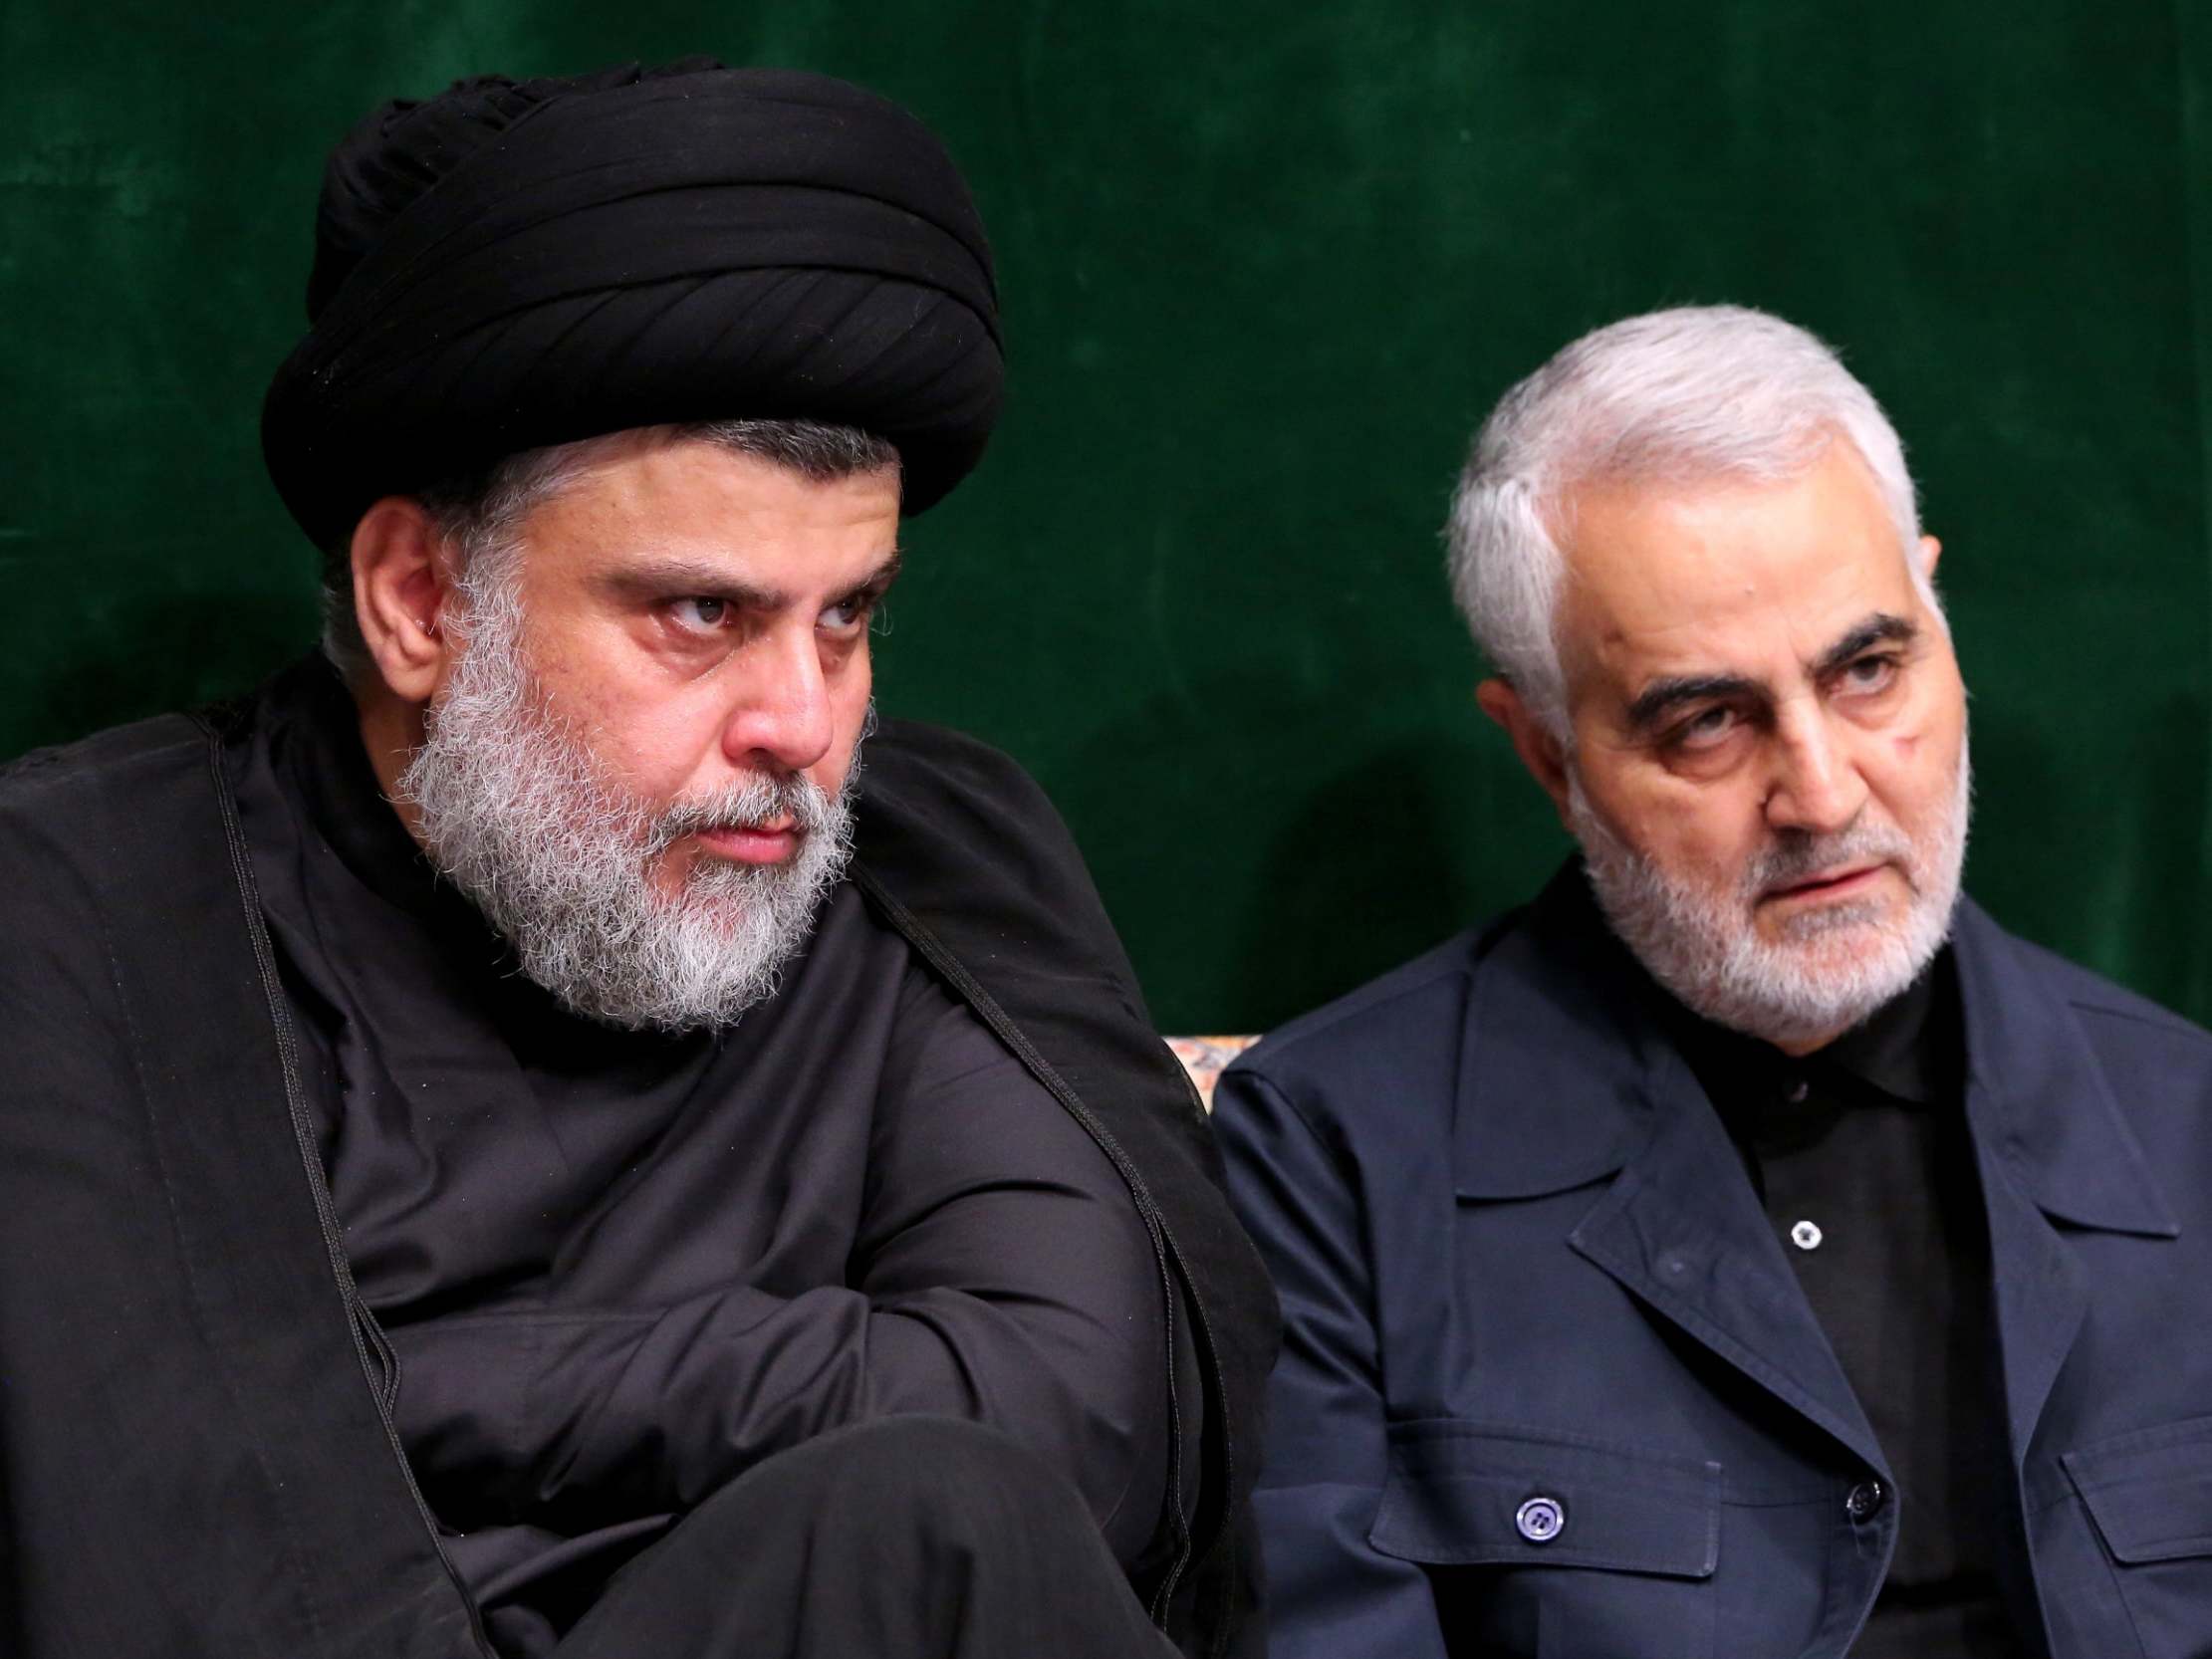 Sadr and Soleimani: the killing of the general marked an escalation in the US-Iran conflict, turning it into an existential struggle for the Shia ruling elite in Iraq